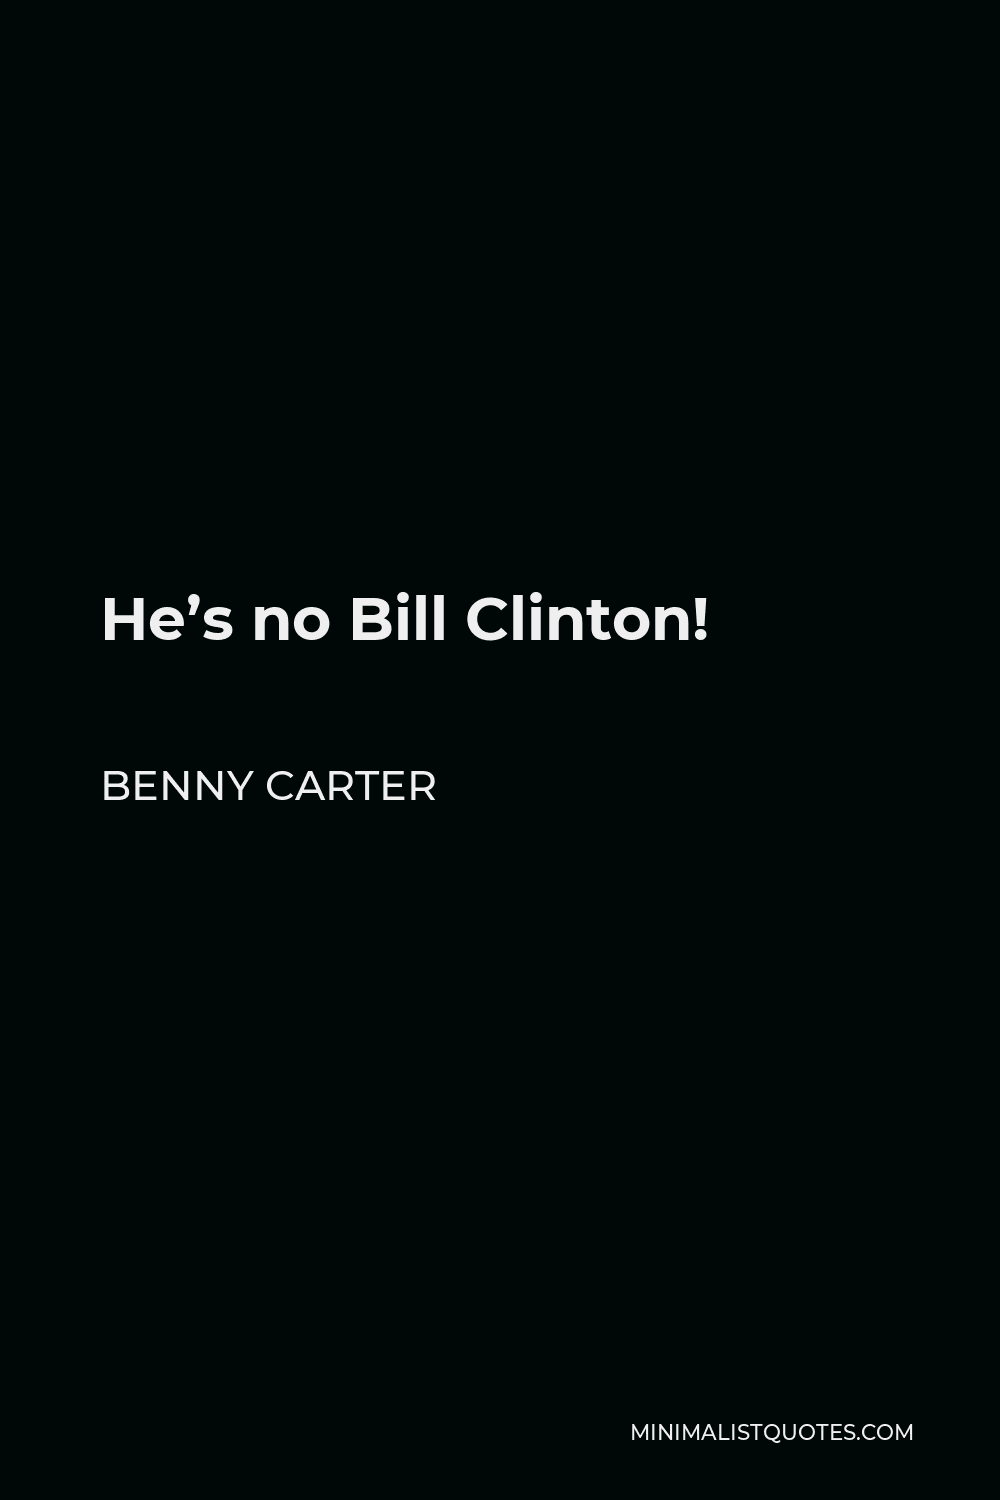 Benny Carter Quote - He’s no Bill Clinton!